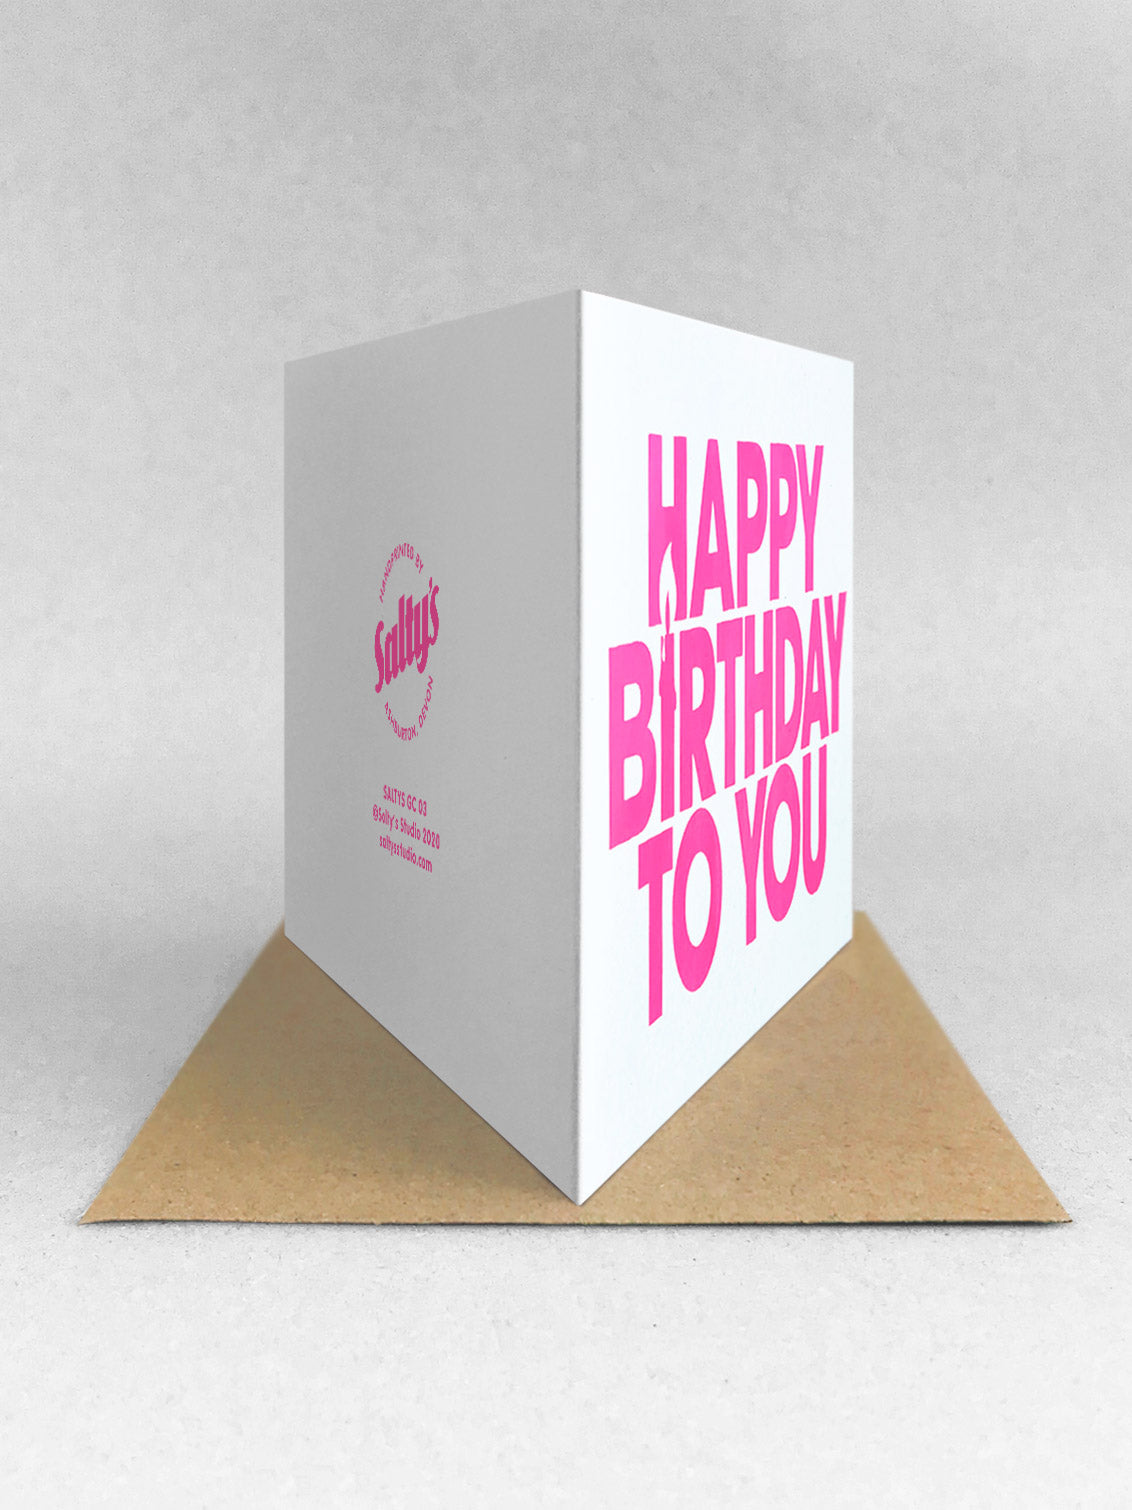 Salty’s Online 
Happy birthday to you card - Neon pink